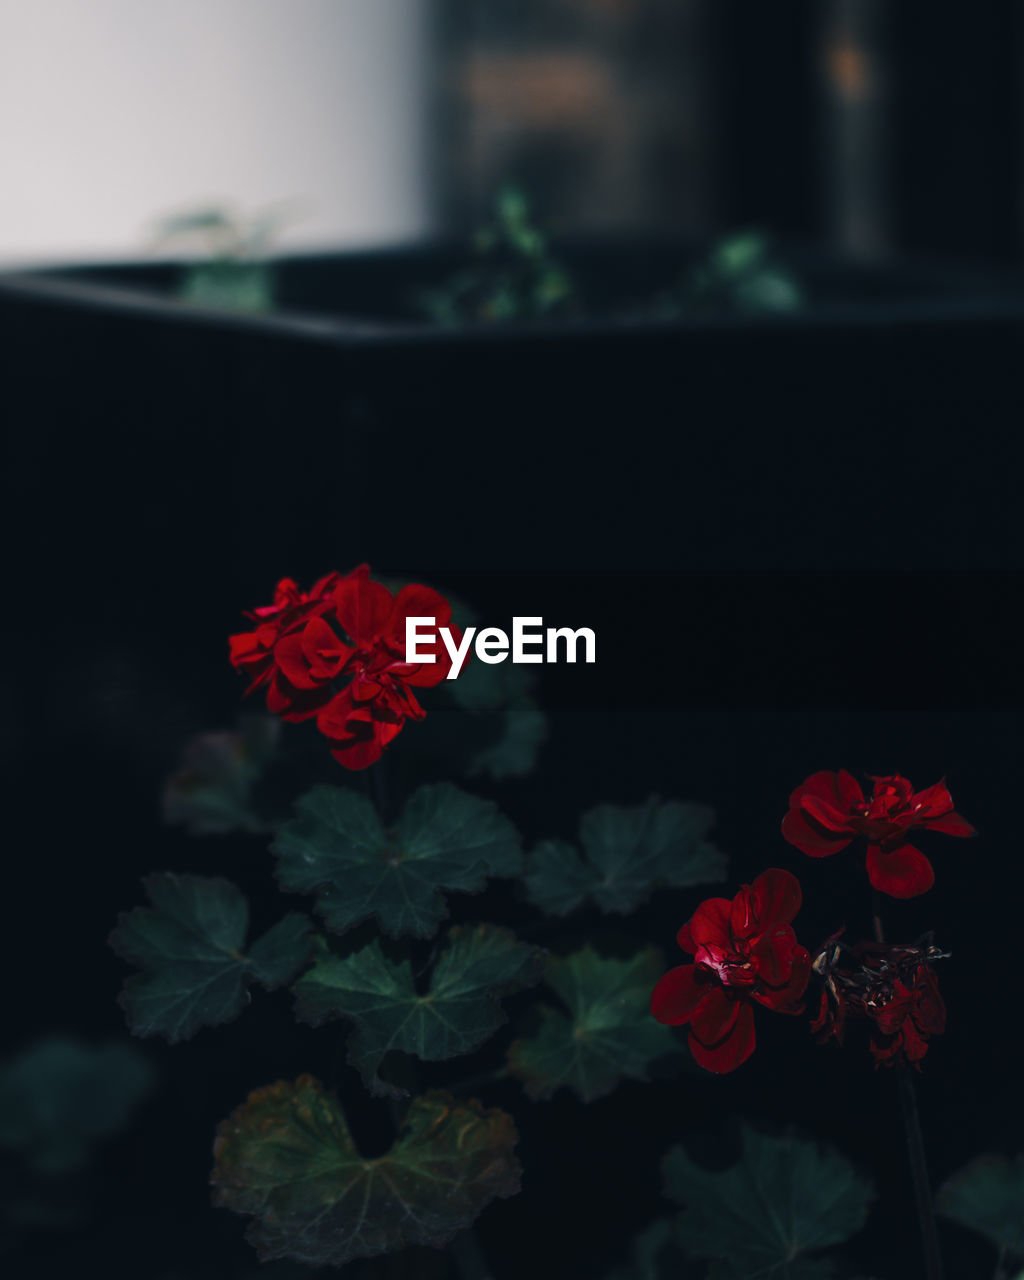 red, flower, plant, flowering plant, petal, nature, leaf, green, no people, beauty in nature, close-up, rose, indoors, freshness, love, plant part, emotion, focus on foreground, black, decoration, darkness, heart shape, flower head, positive emotion